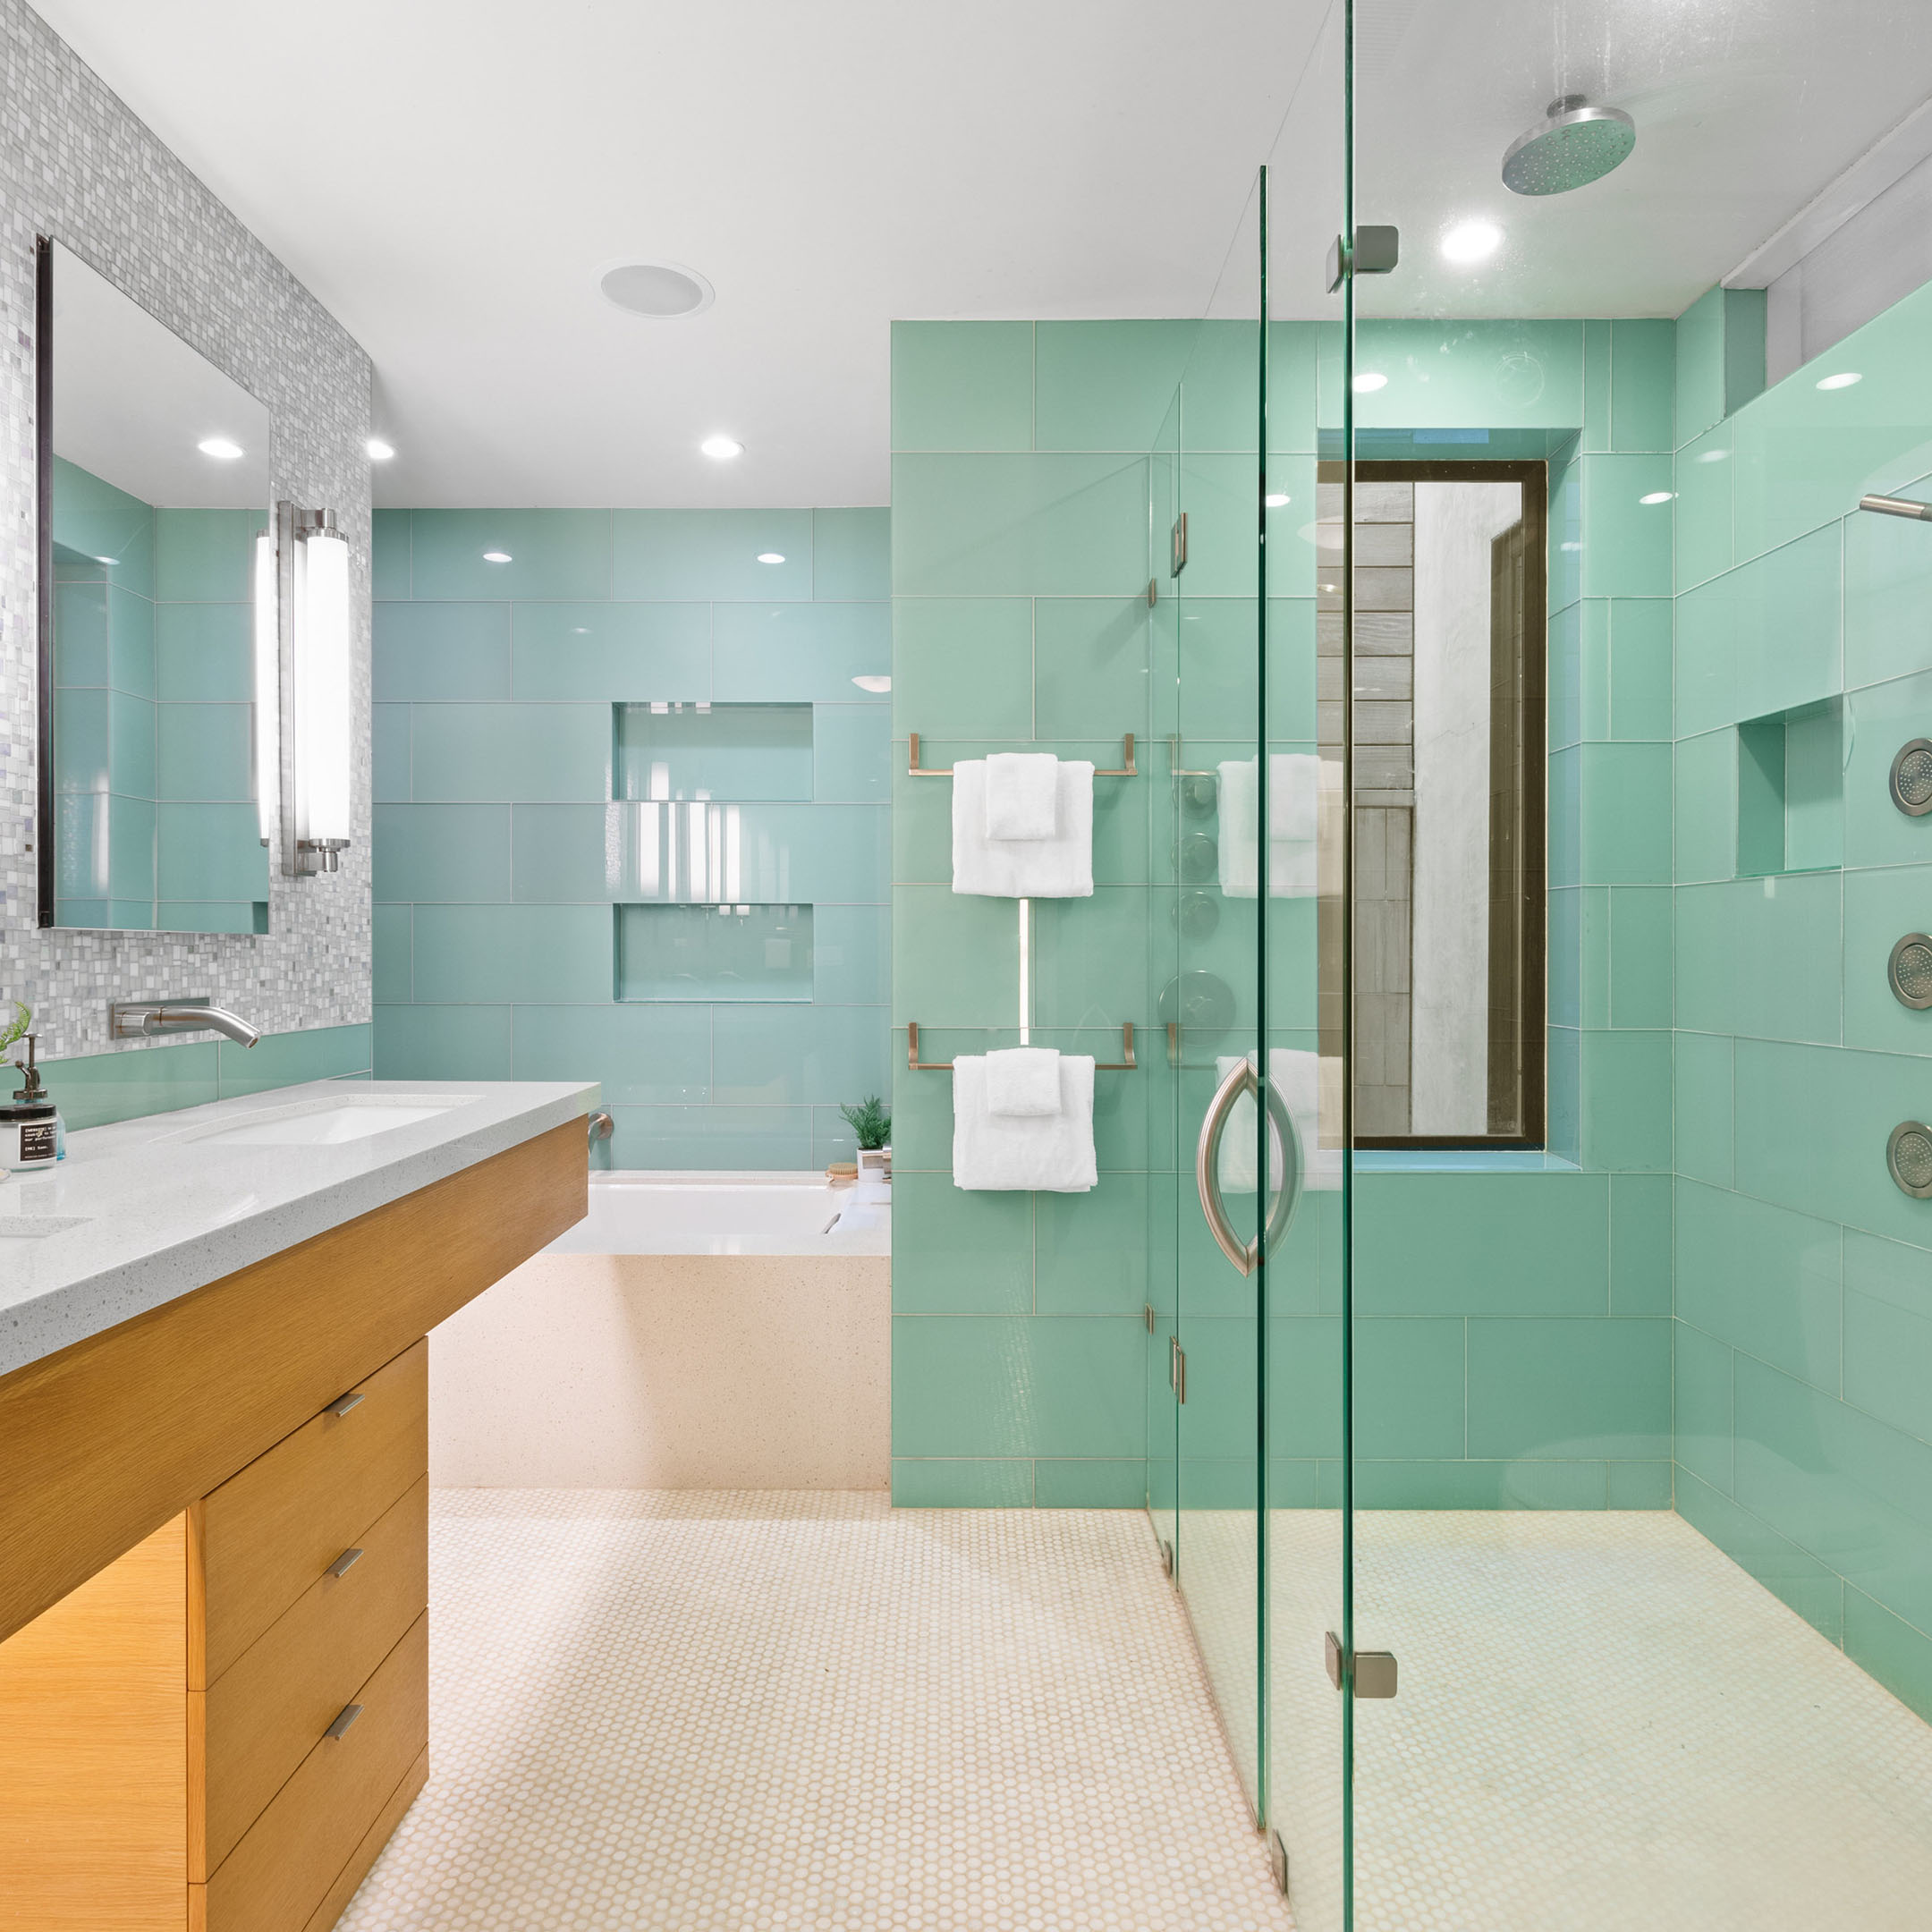 Green tiled bathroom with soaking tub and a garden shower